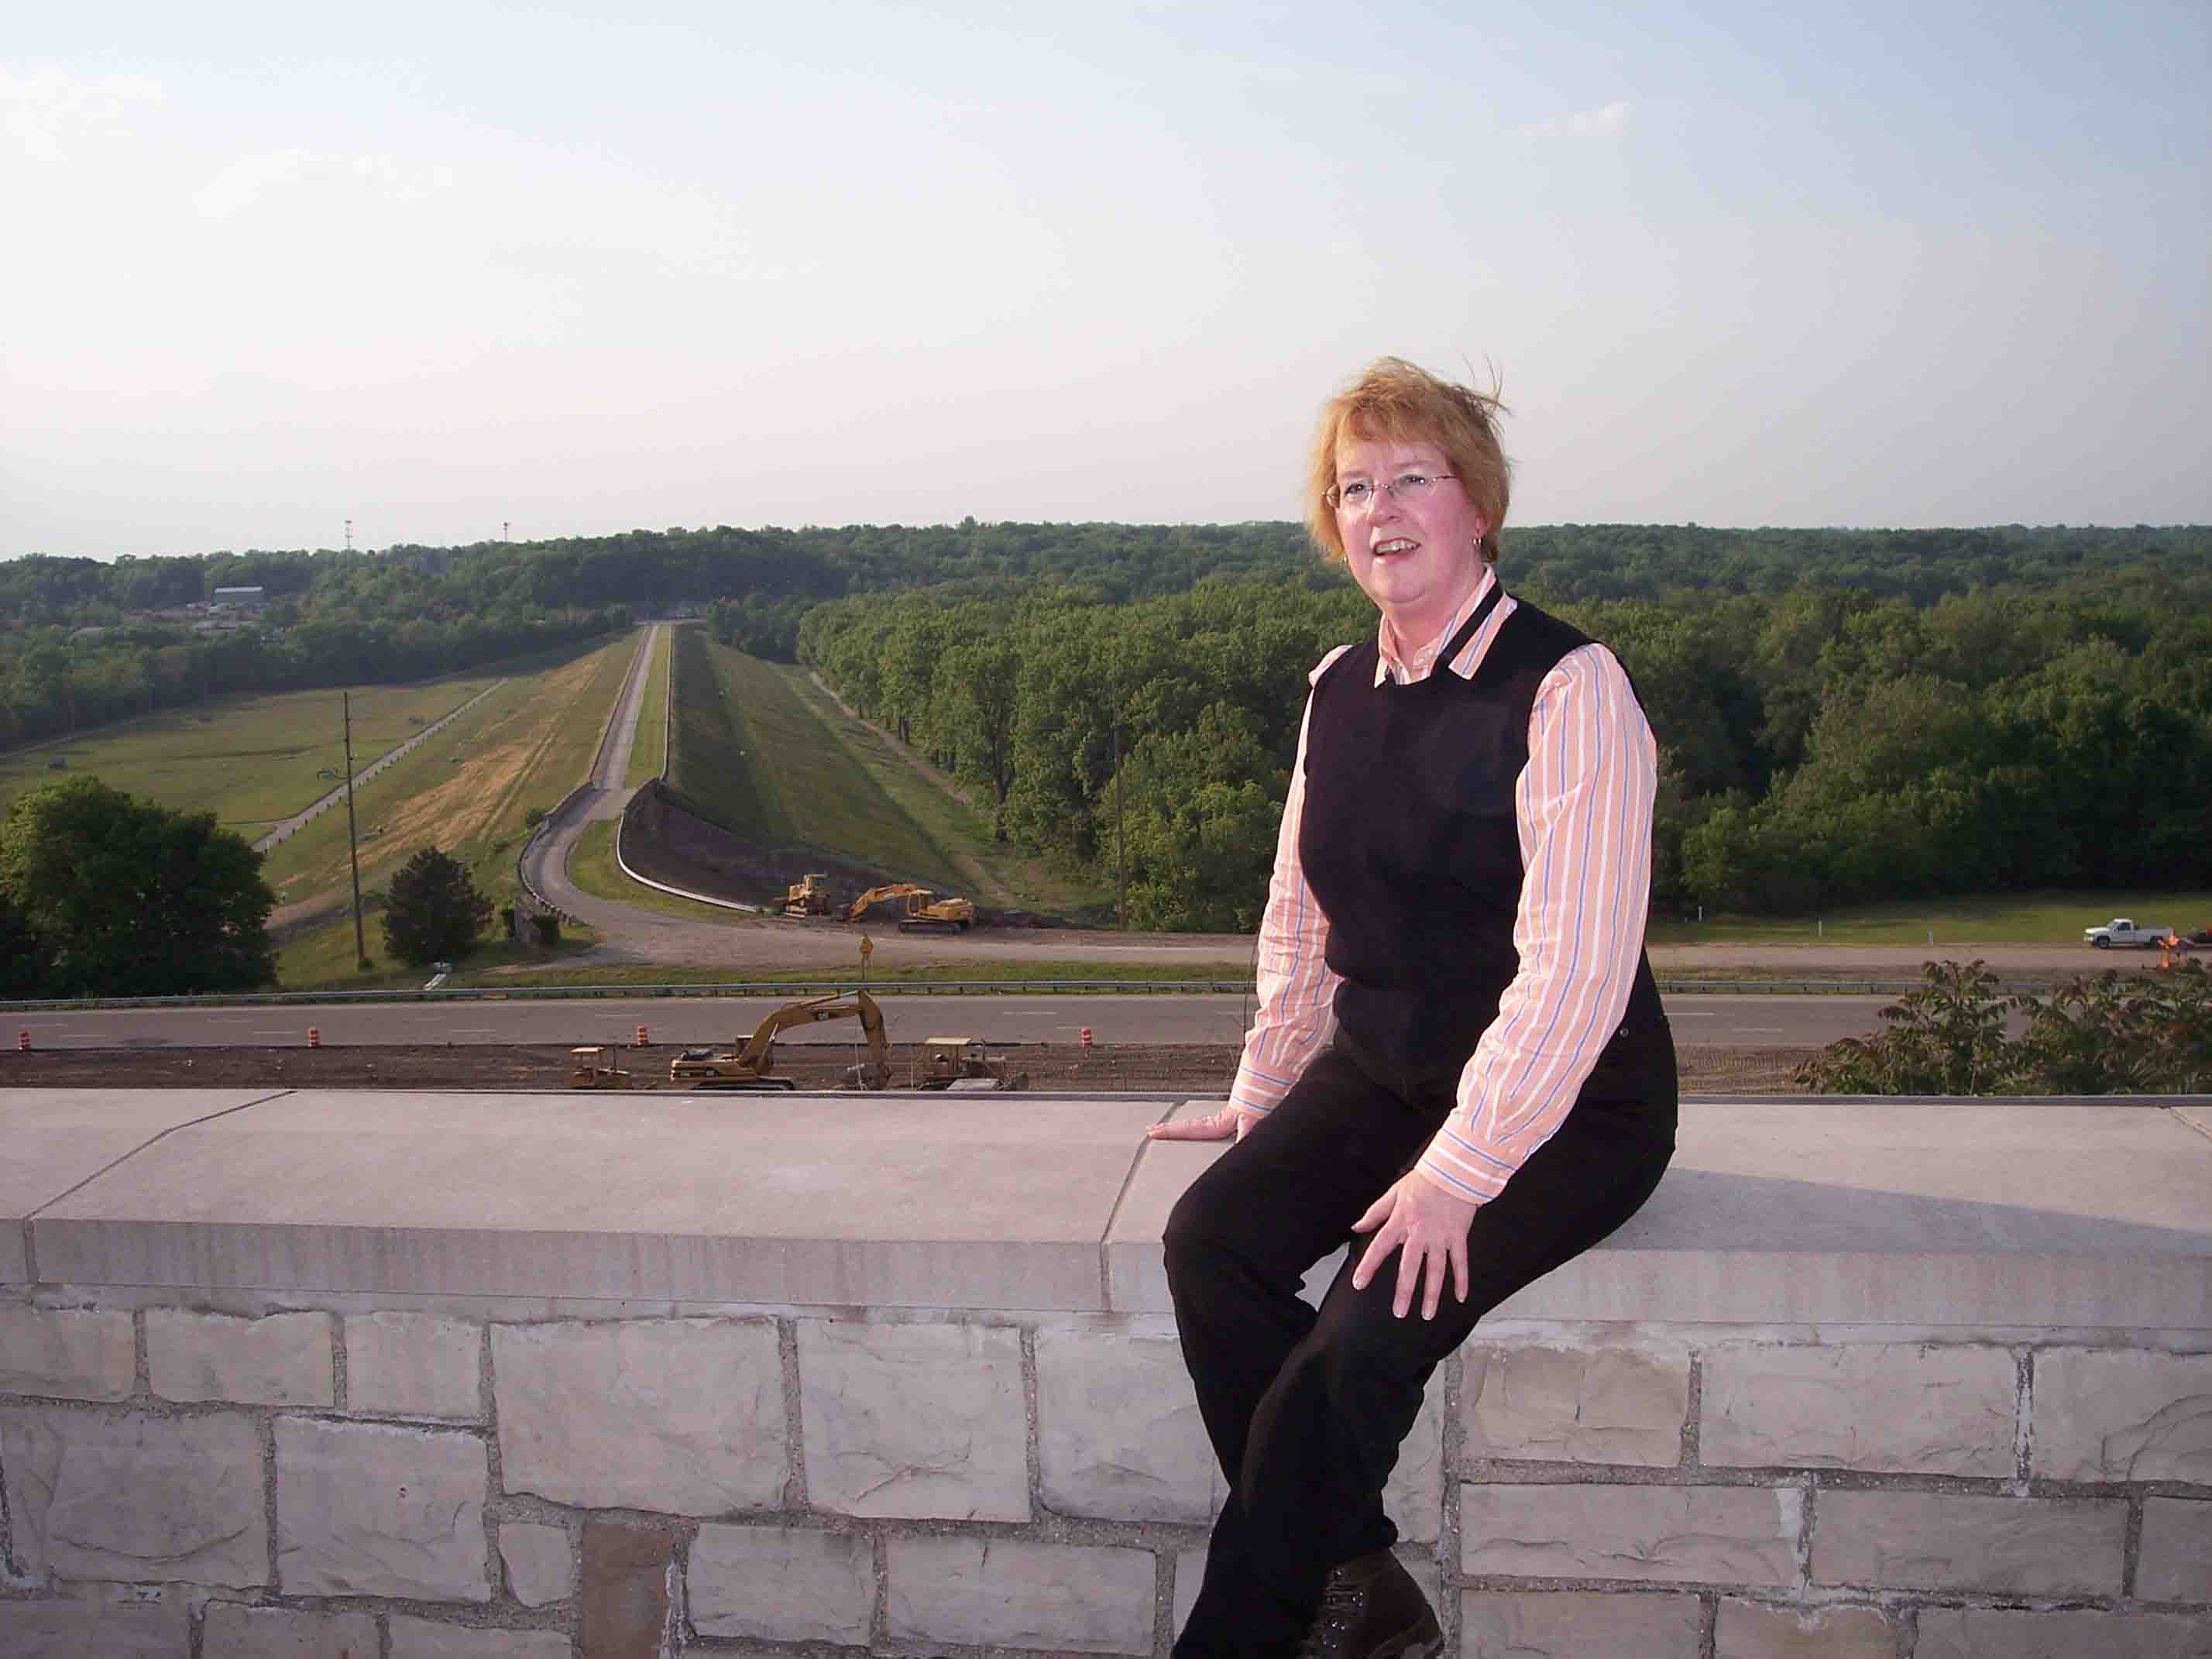 Trudy E. Bell overlooking Huffman Dam dry detention flood control basin north of Dayton, Ohio